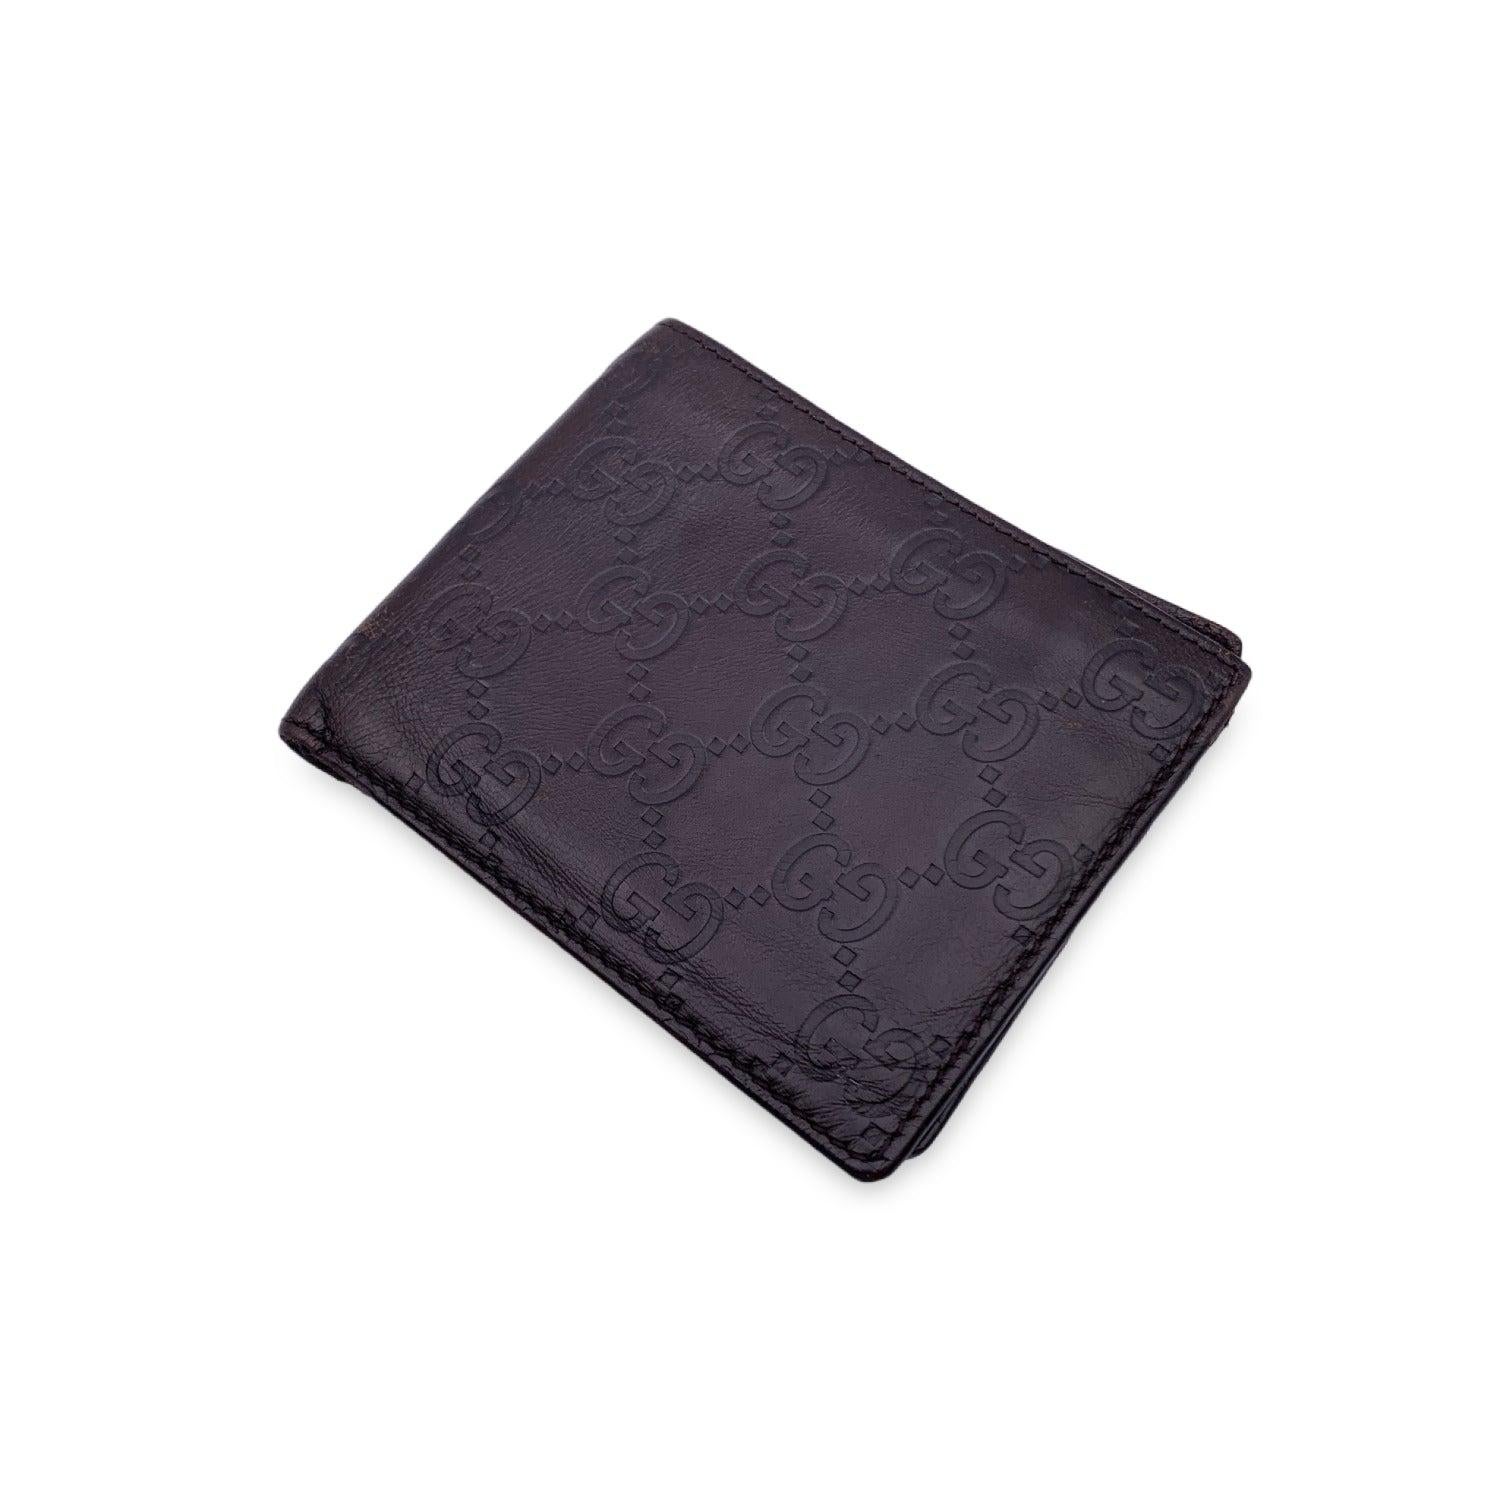 This beautiful wallet will come with a Certificate of Authenticity provided by Entrupy. The certificate will be provided at no further cost

Gucci brown Guccissima leather bifold wallet. Inside it has 6 card slots and 2 bill compartments. 'Gucci -